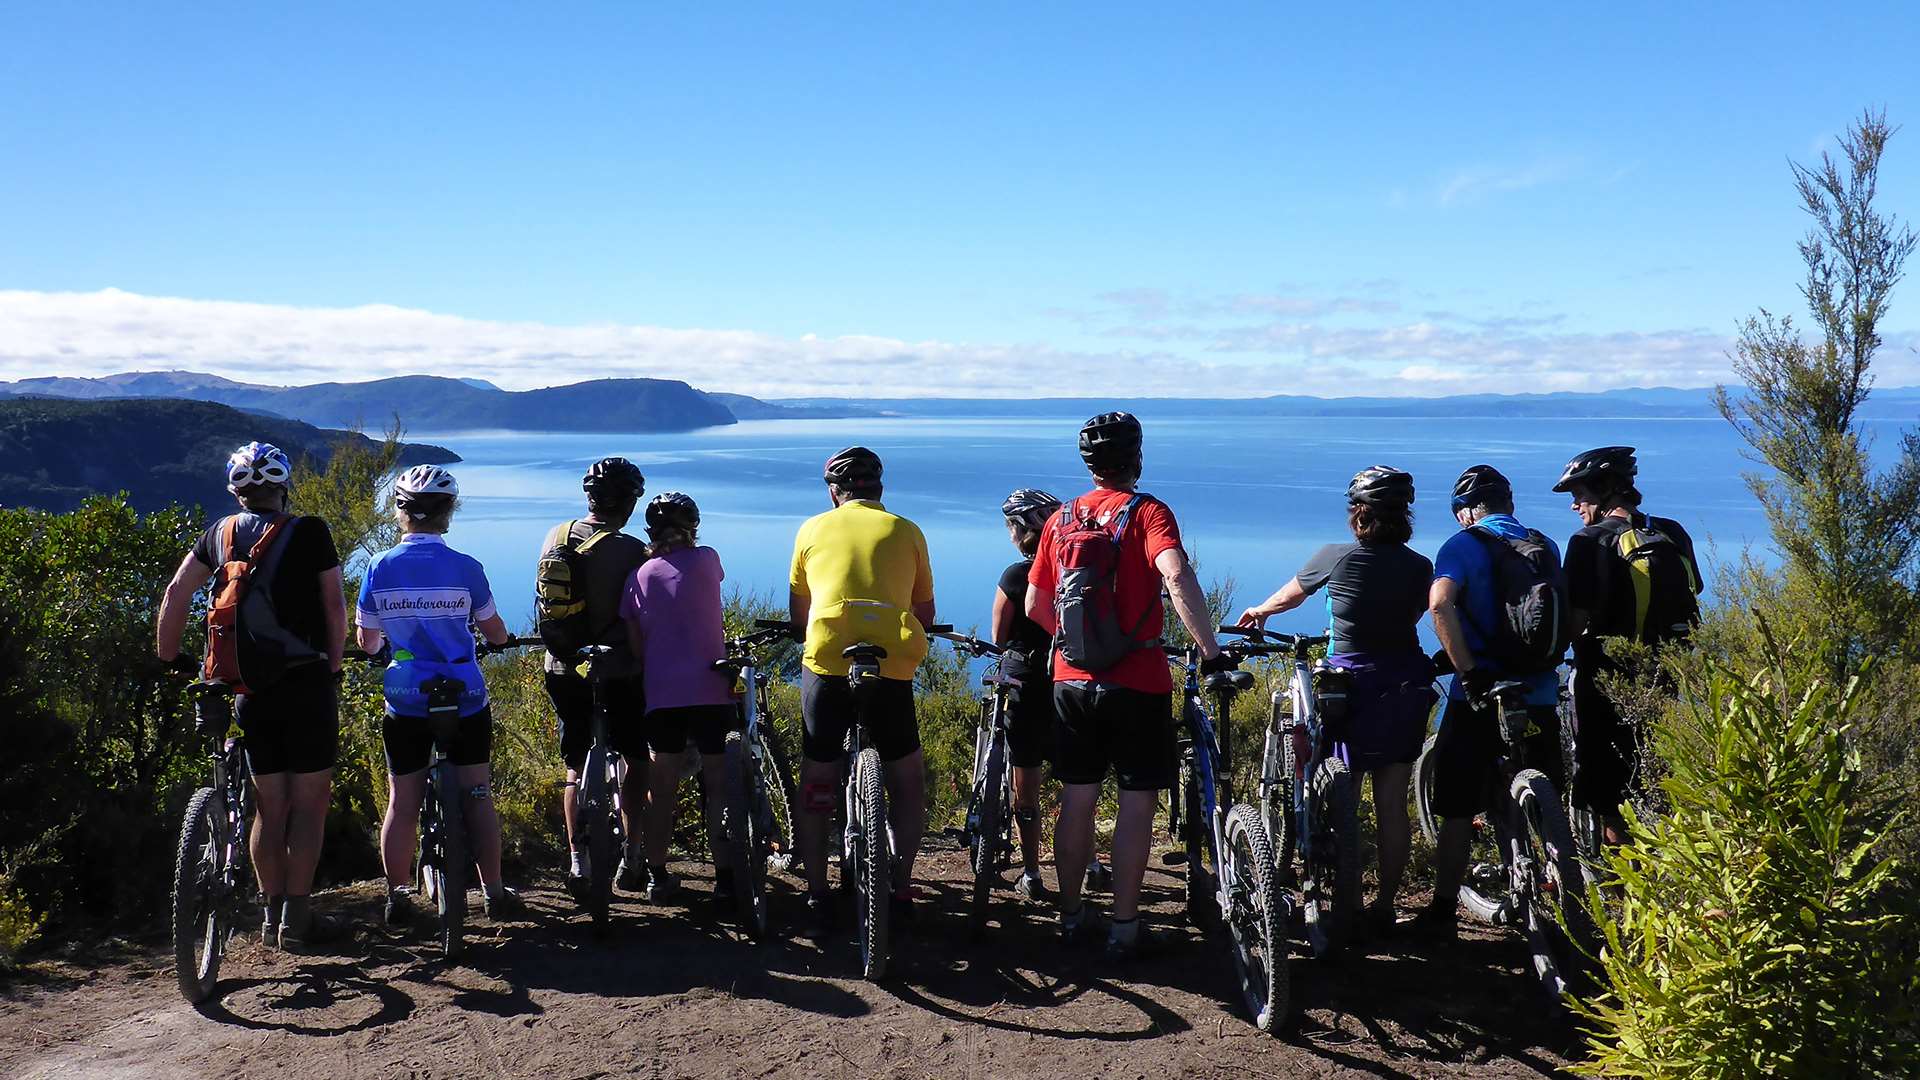 Group overlooking Lake Taupo from the Great Lake Trails